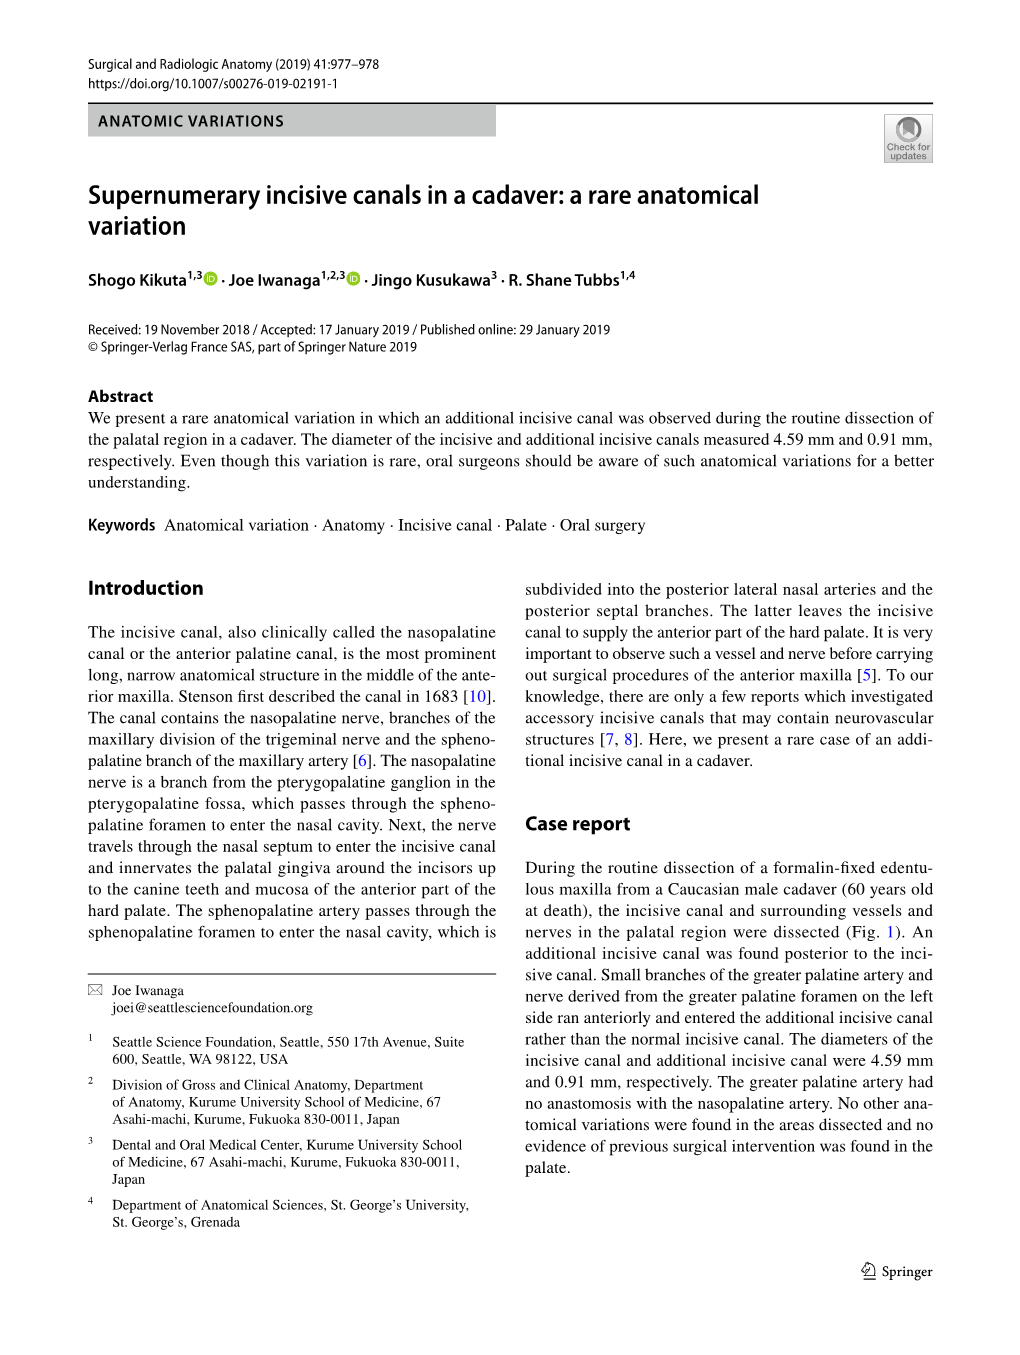 Supernumerary Incisive Canals in a Cadaver: a Rare Anatomical Variation